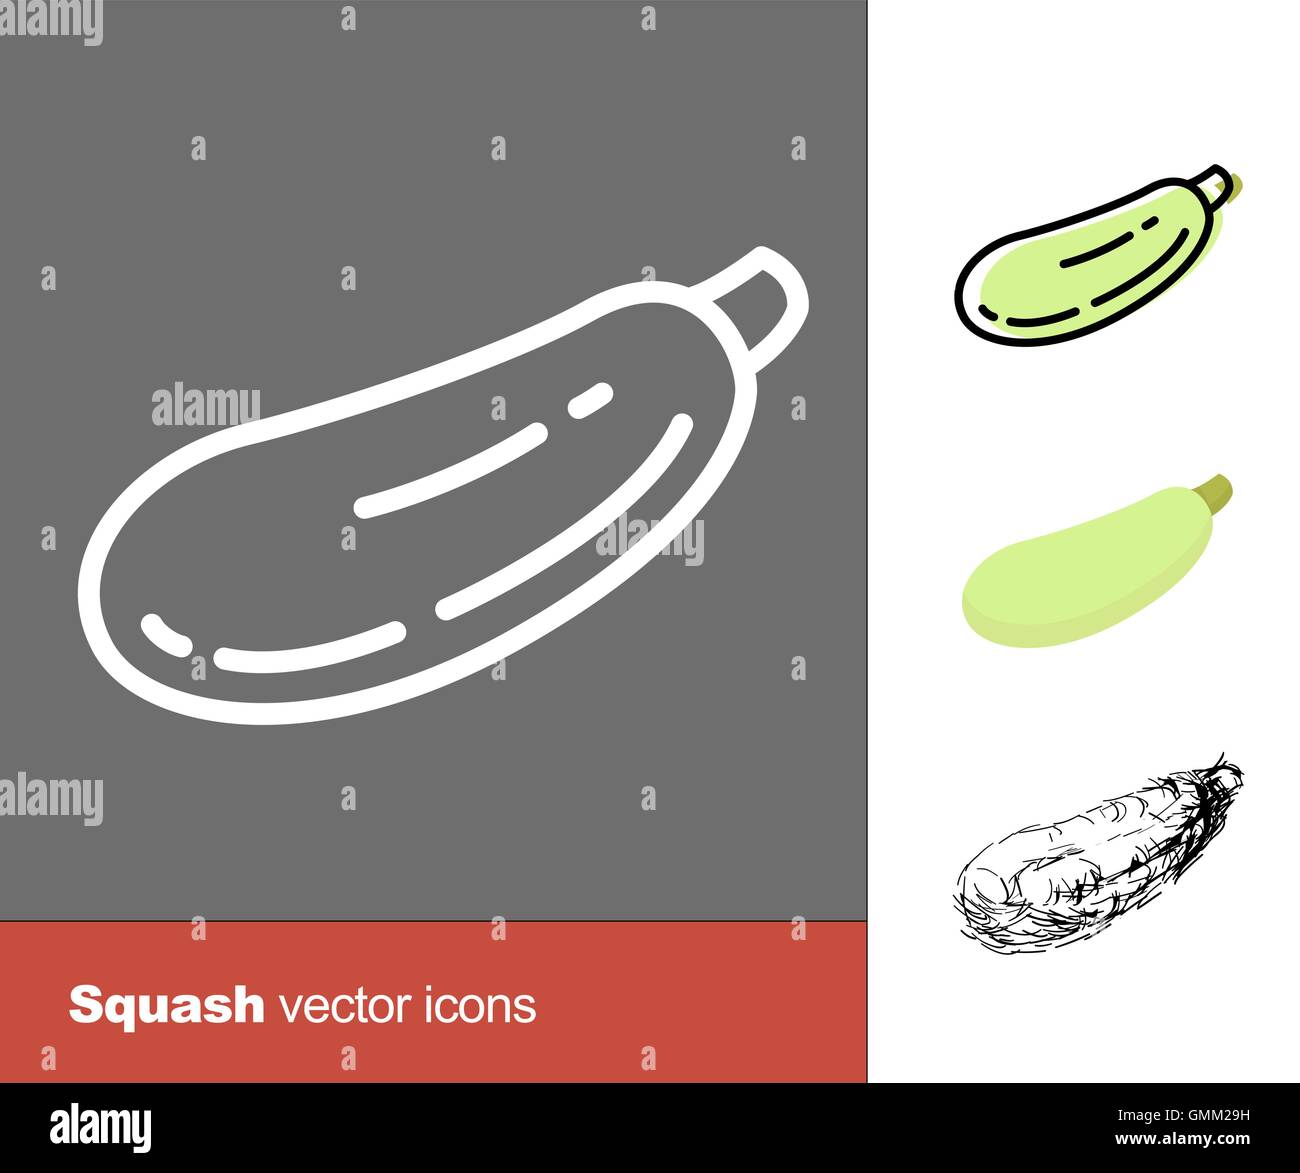 Squash vector icons. Thin line, flat, and hand drawn styles Stock Vector